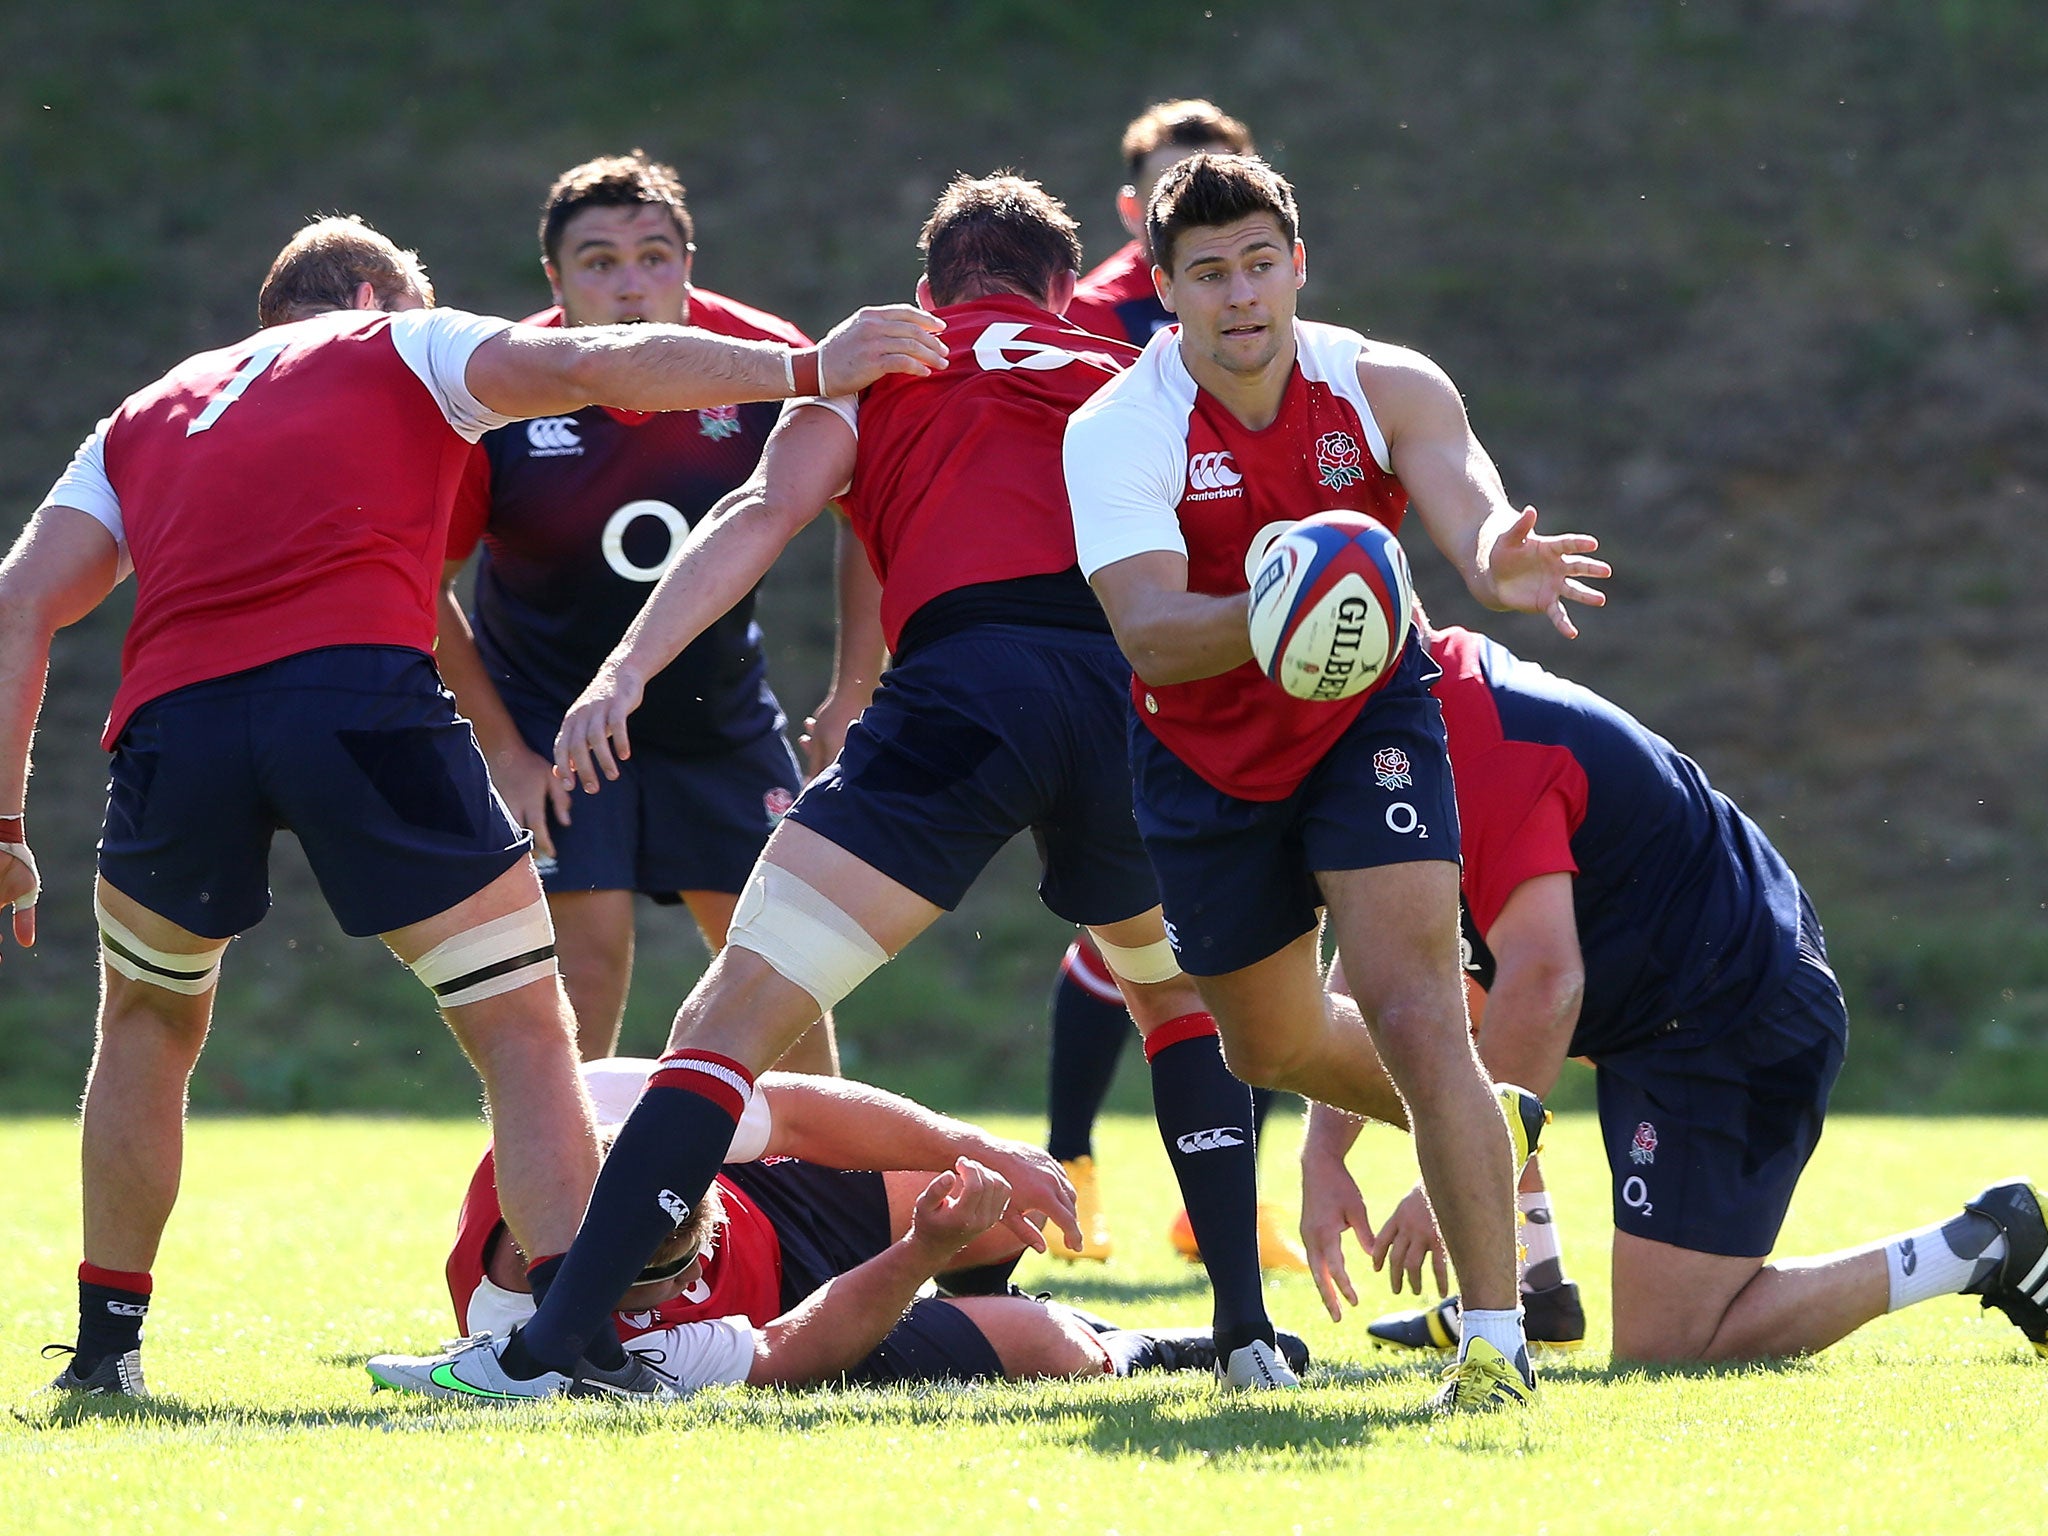 Ben Youngs passes the ball during an England training session in Surrey